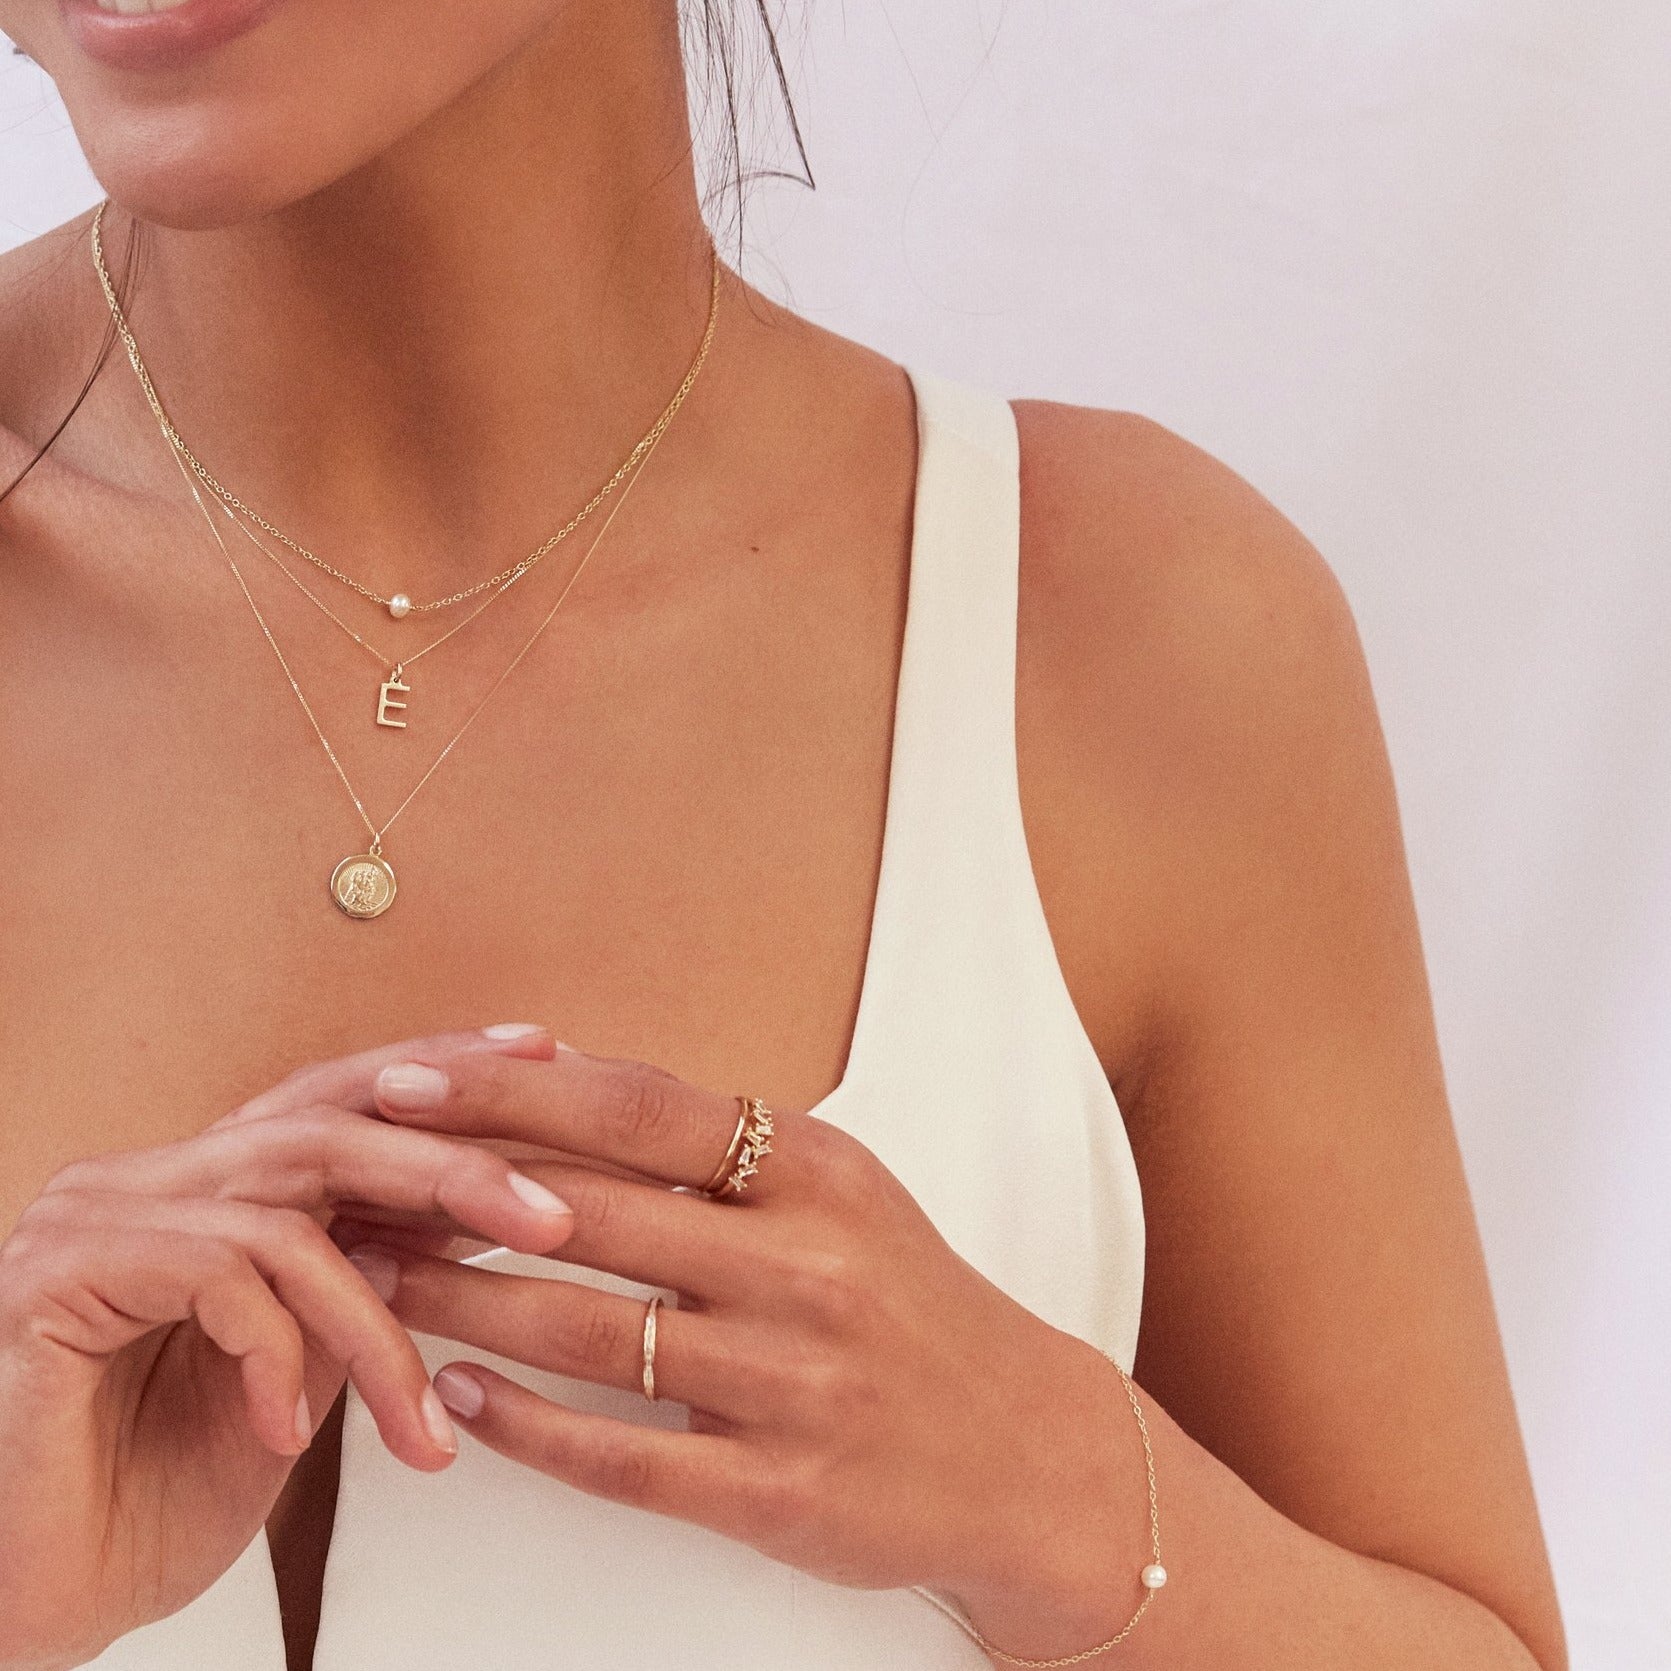 A woman wearing a gold single pearl bracelet on a wrist her wrist with a gold diamond style baguette ring on her finger, a gold single pearl choker around her neck layered with a gold E letter necklace and a gold symbol necklace